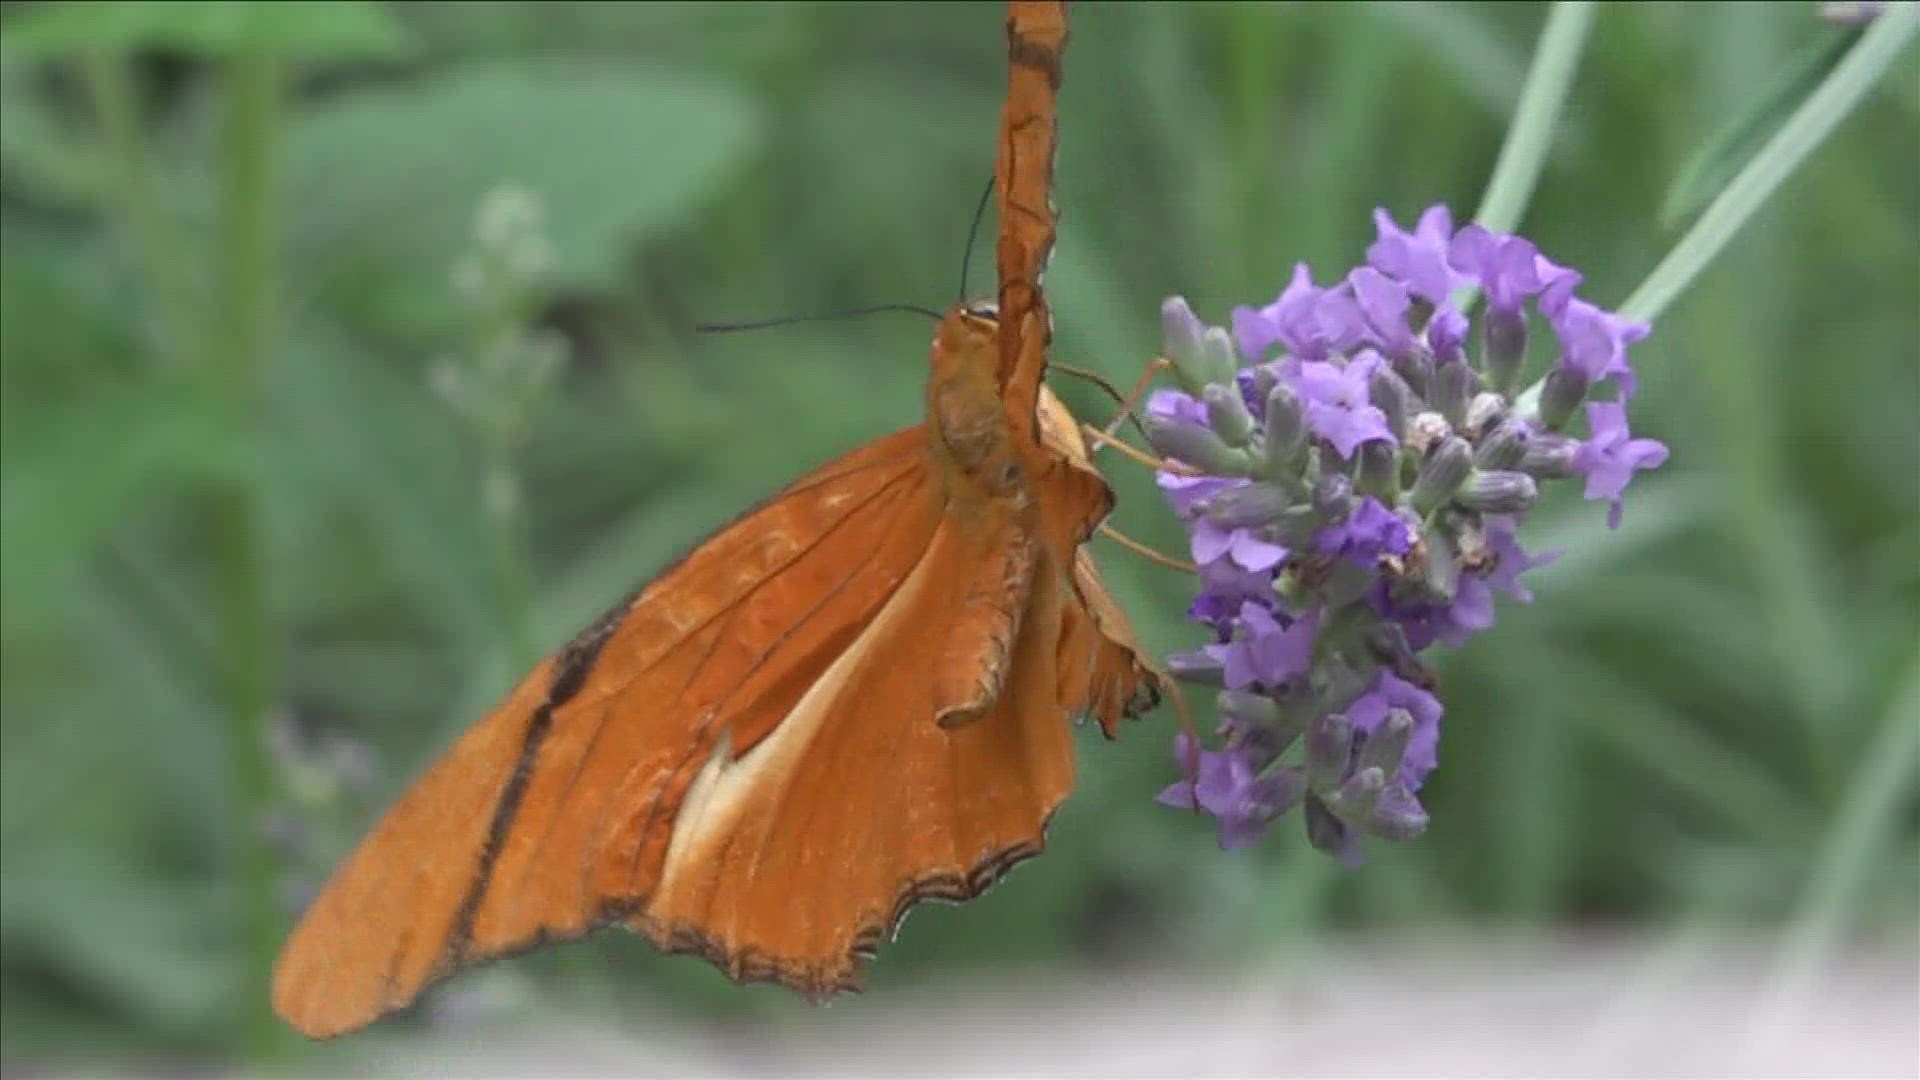 Whether families decide to trek to the Zoo through memorial day weekend (or wait until Tuesday when kids get in free), a new butterfly exhibit is now open.